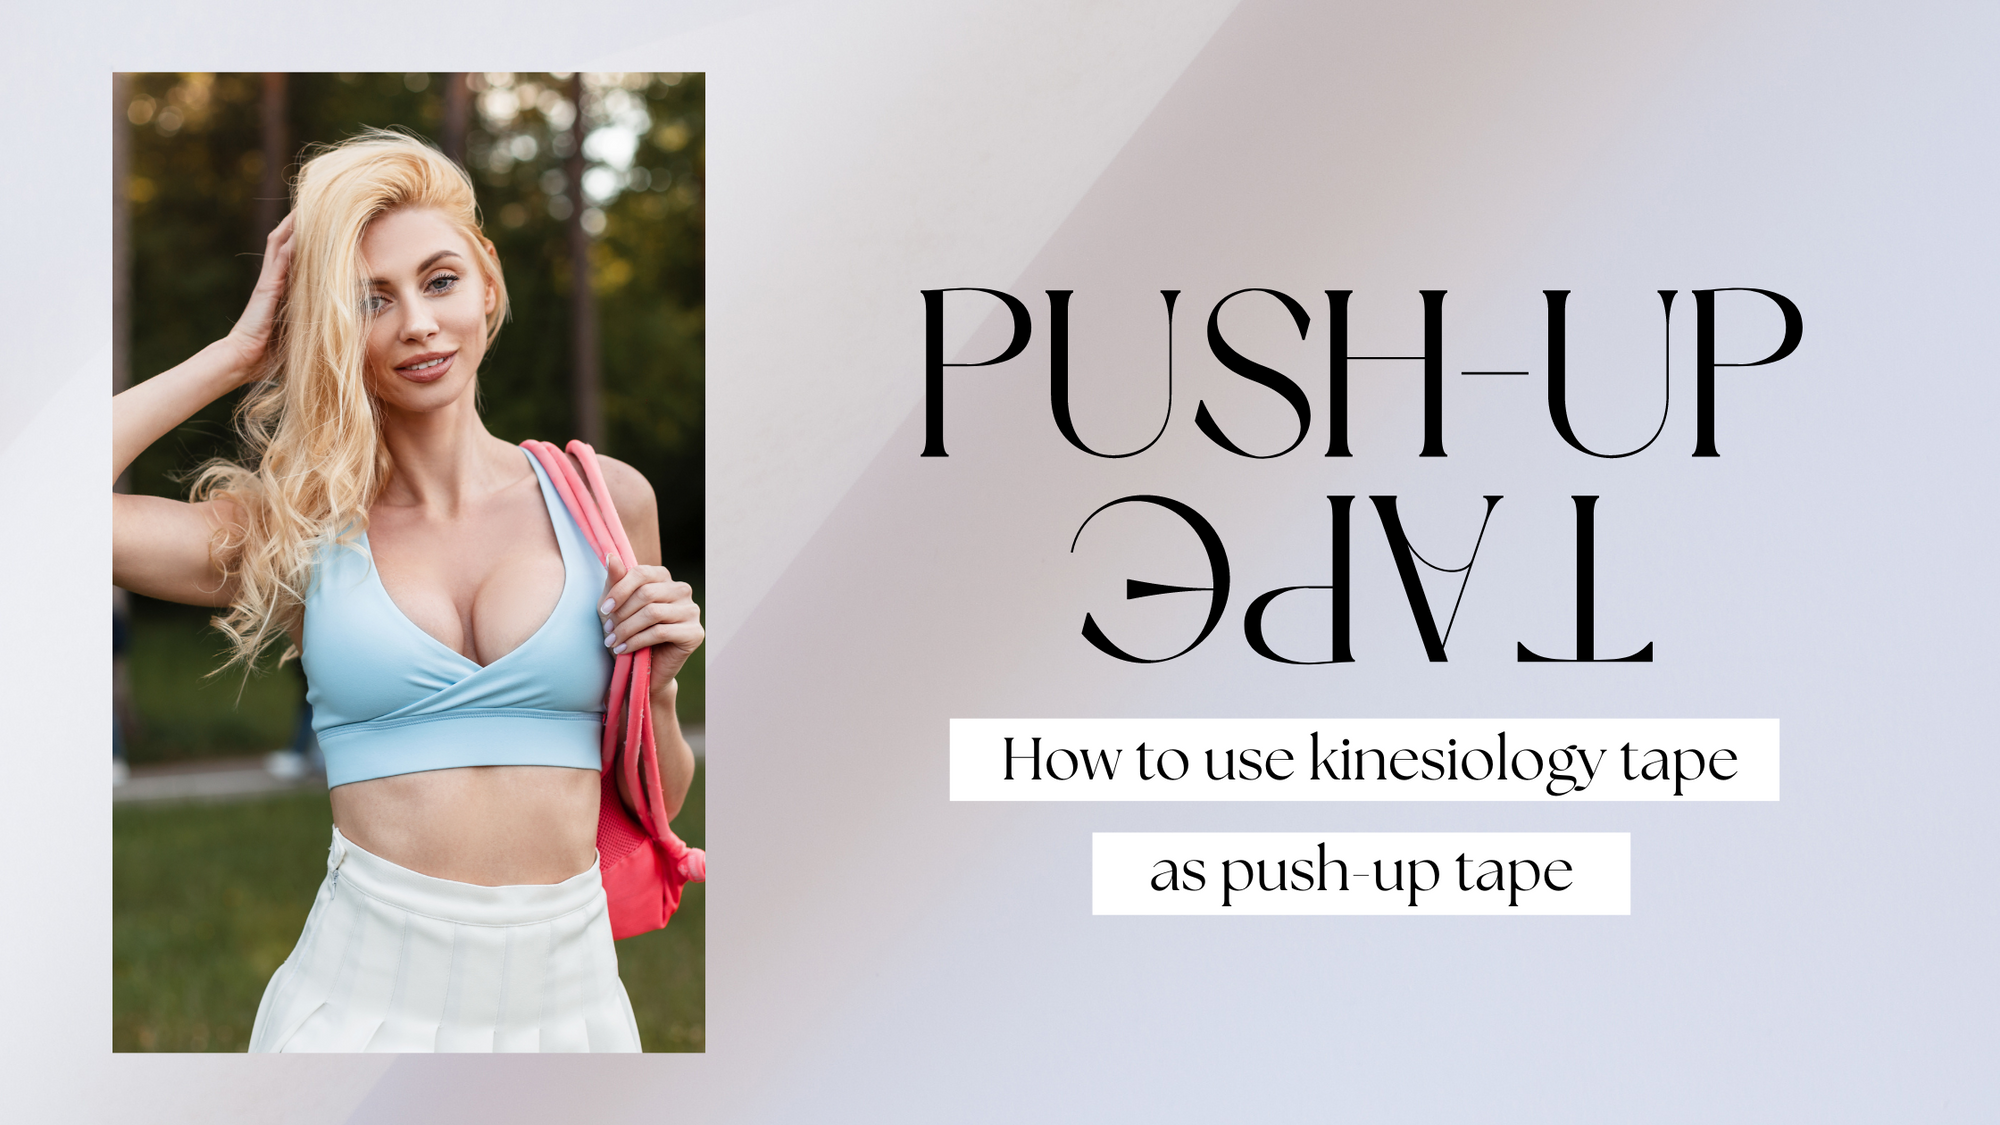 Kinesiology tape as boob tape or push-up tape